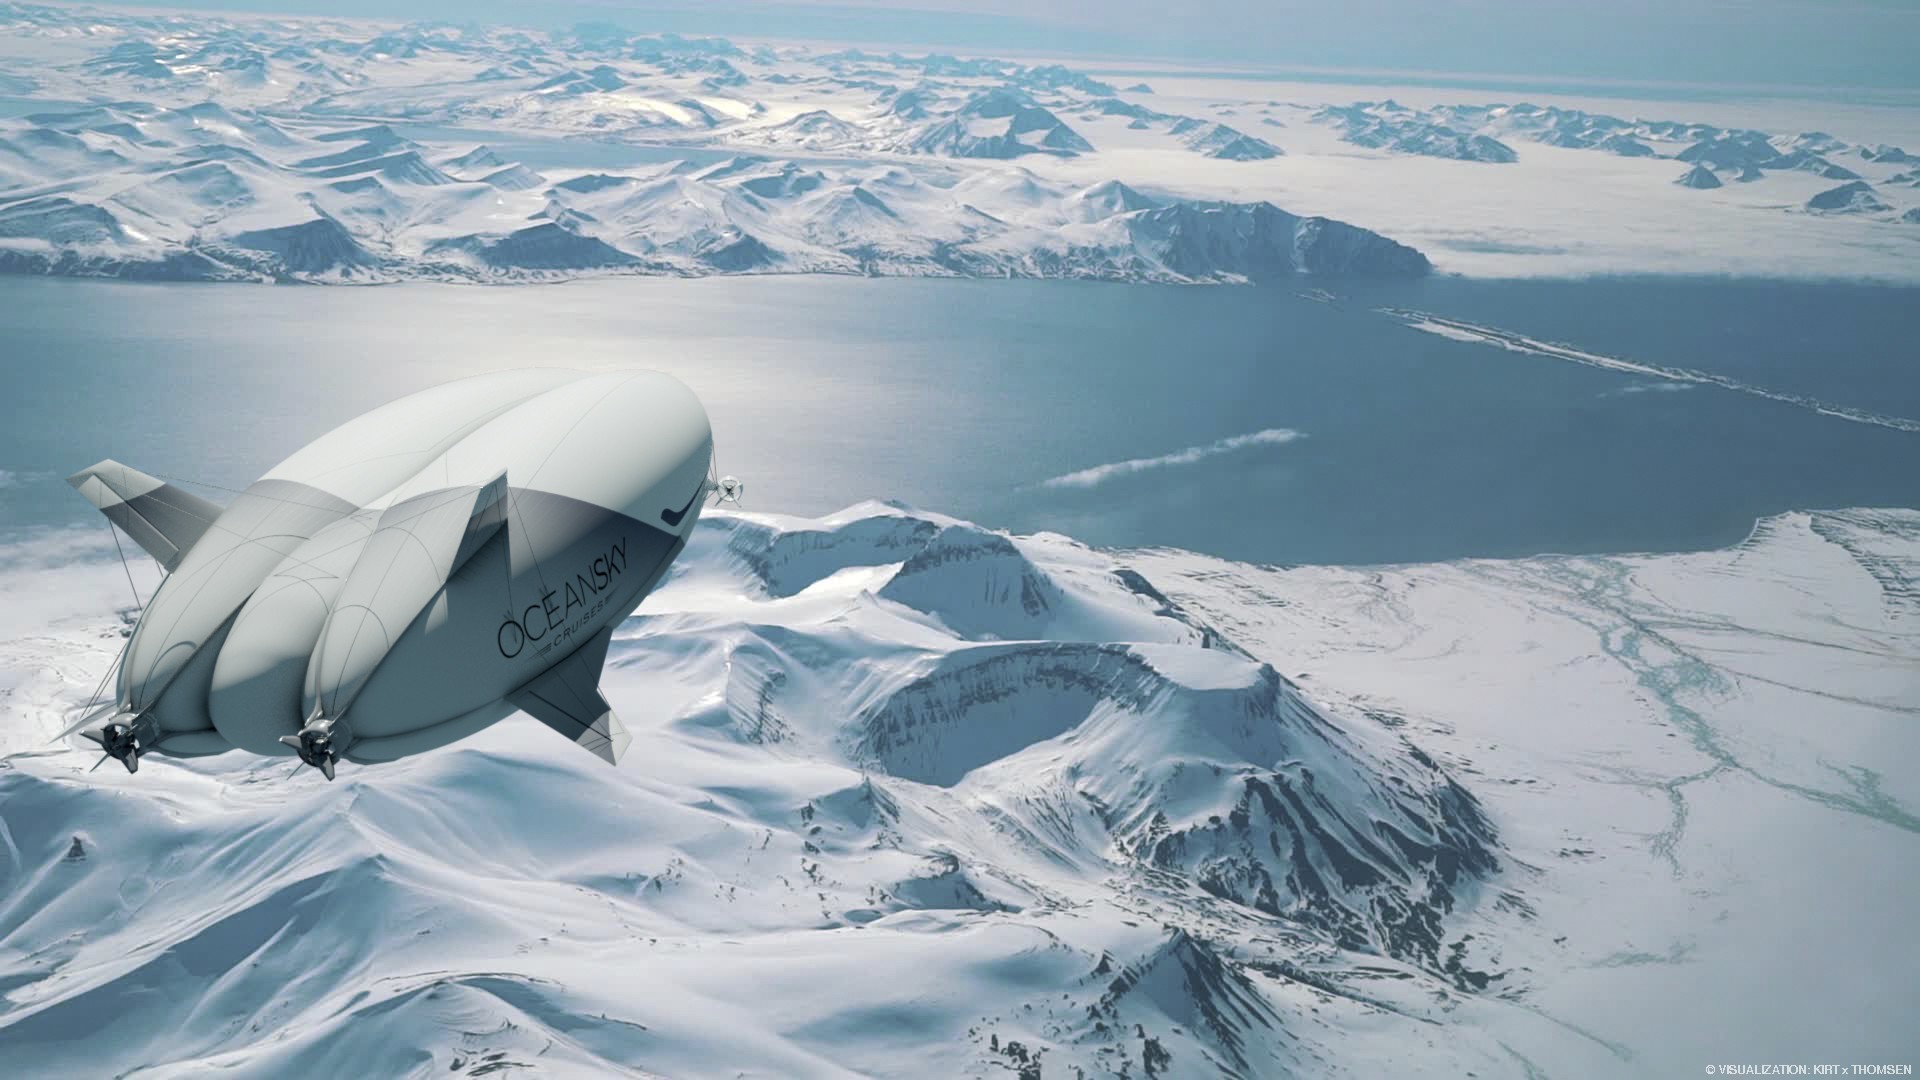 Swedish company OceanSky Cruises is offering trips to the North Pole aboard the Airlander 10, aka “The Flying Bum”.